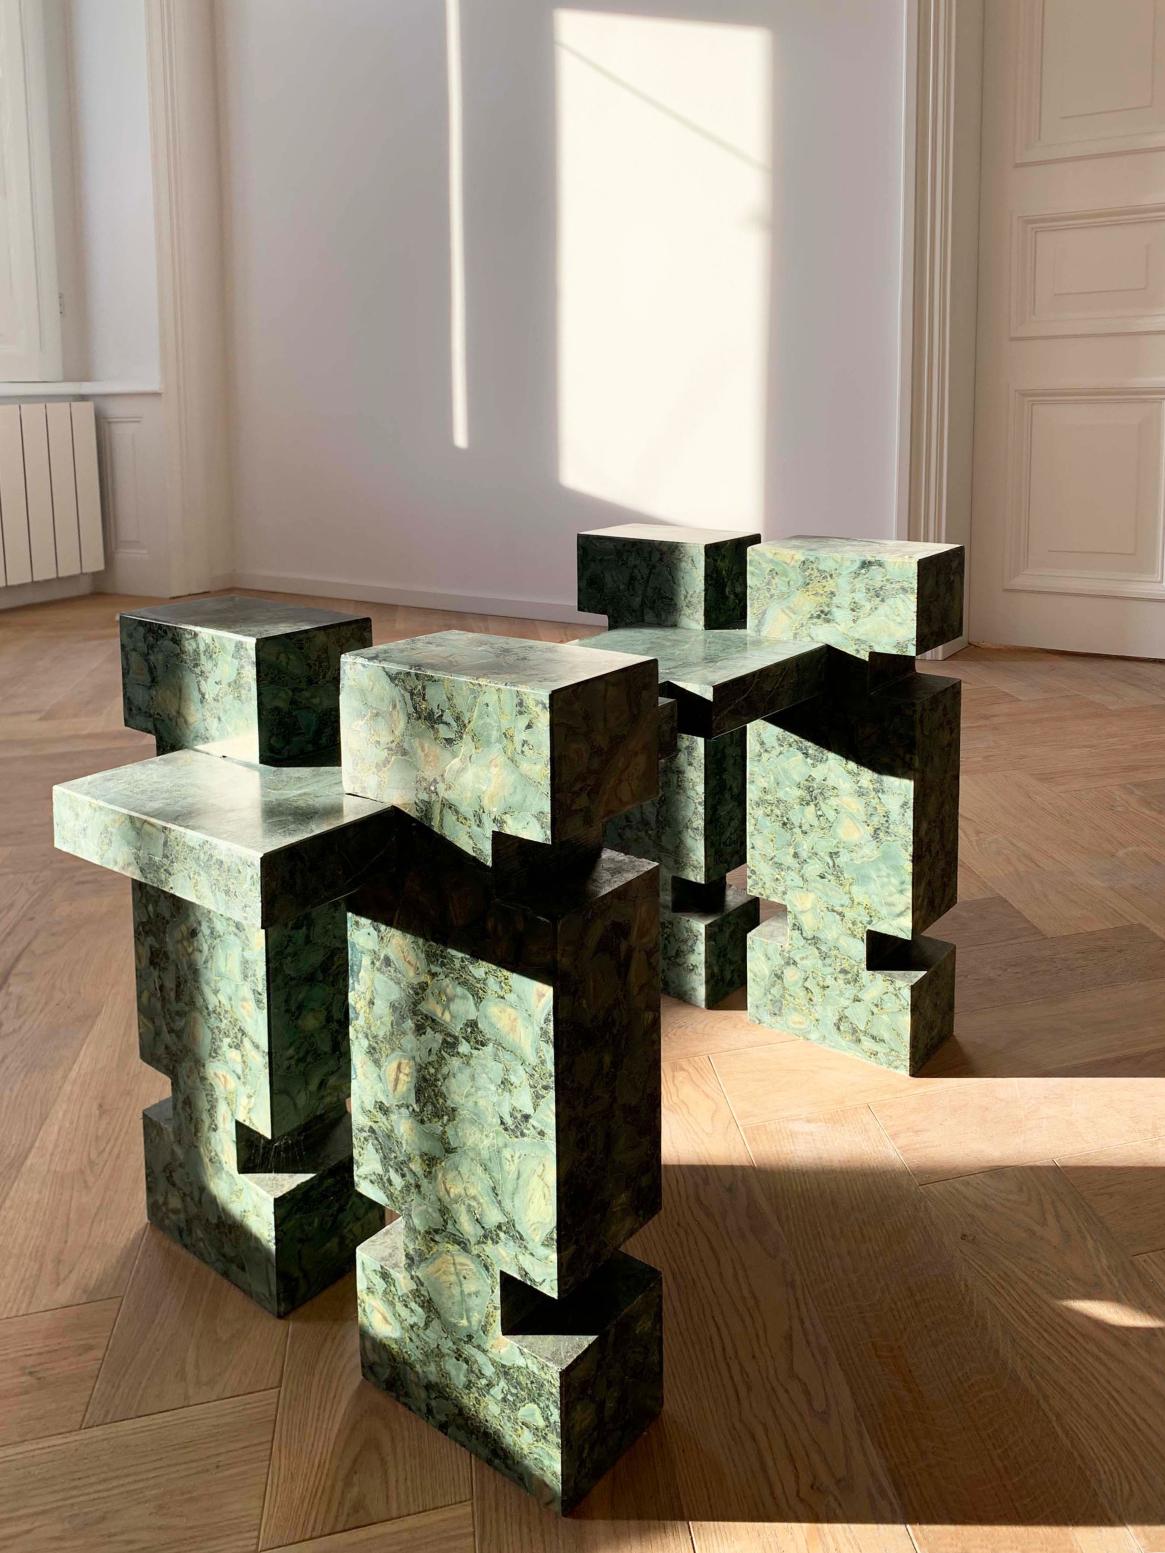 Element Diabase Bulk Stool by Nana Zaalishvili
Dimensions: W 85 x D 45 x H 55 cm
Materials: Diabase Stone

‘Element’, which combines furniture of different functions, was created under the influence of the Georgian Oda house and the 'construction